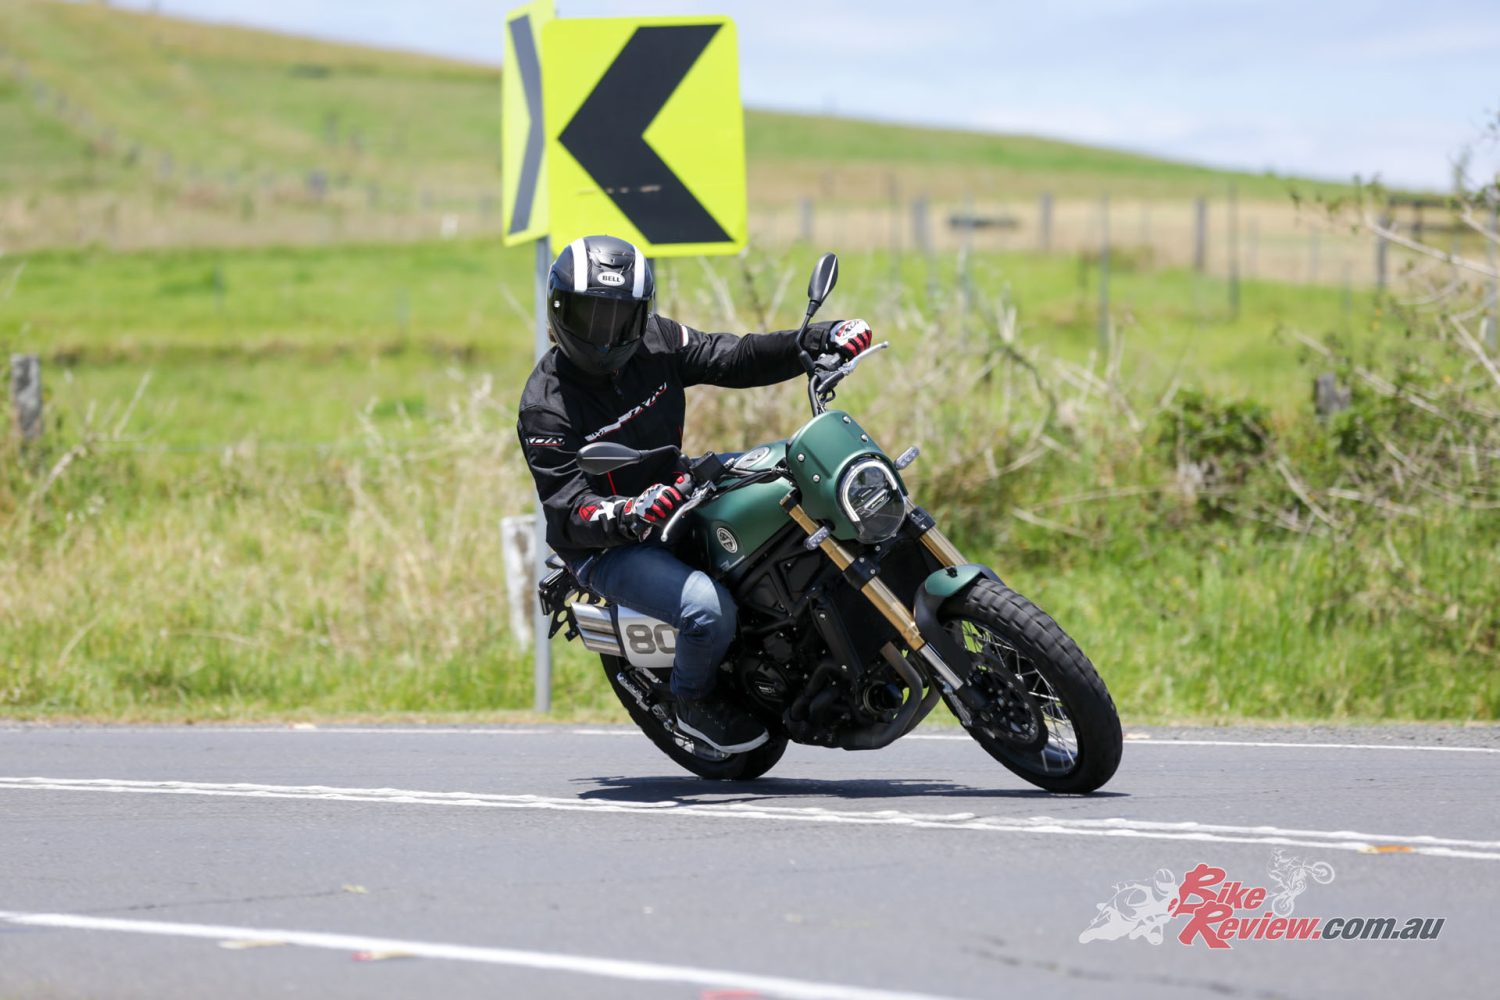 "My main goal is to just ride the thing a bit more, especially off-road to see how much of a thrashing it can really handle."